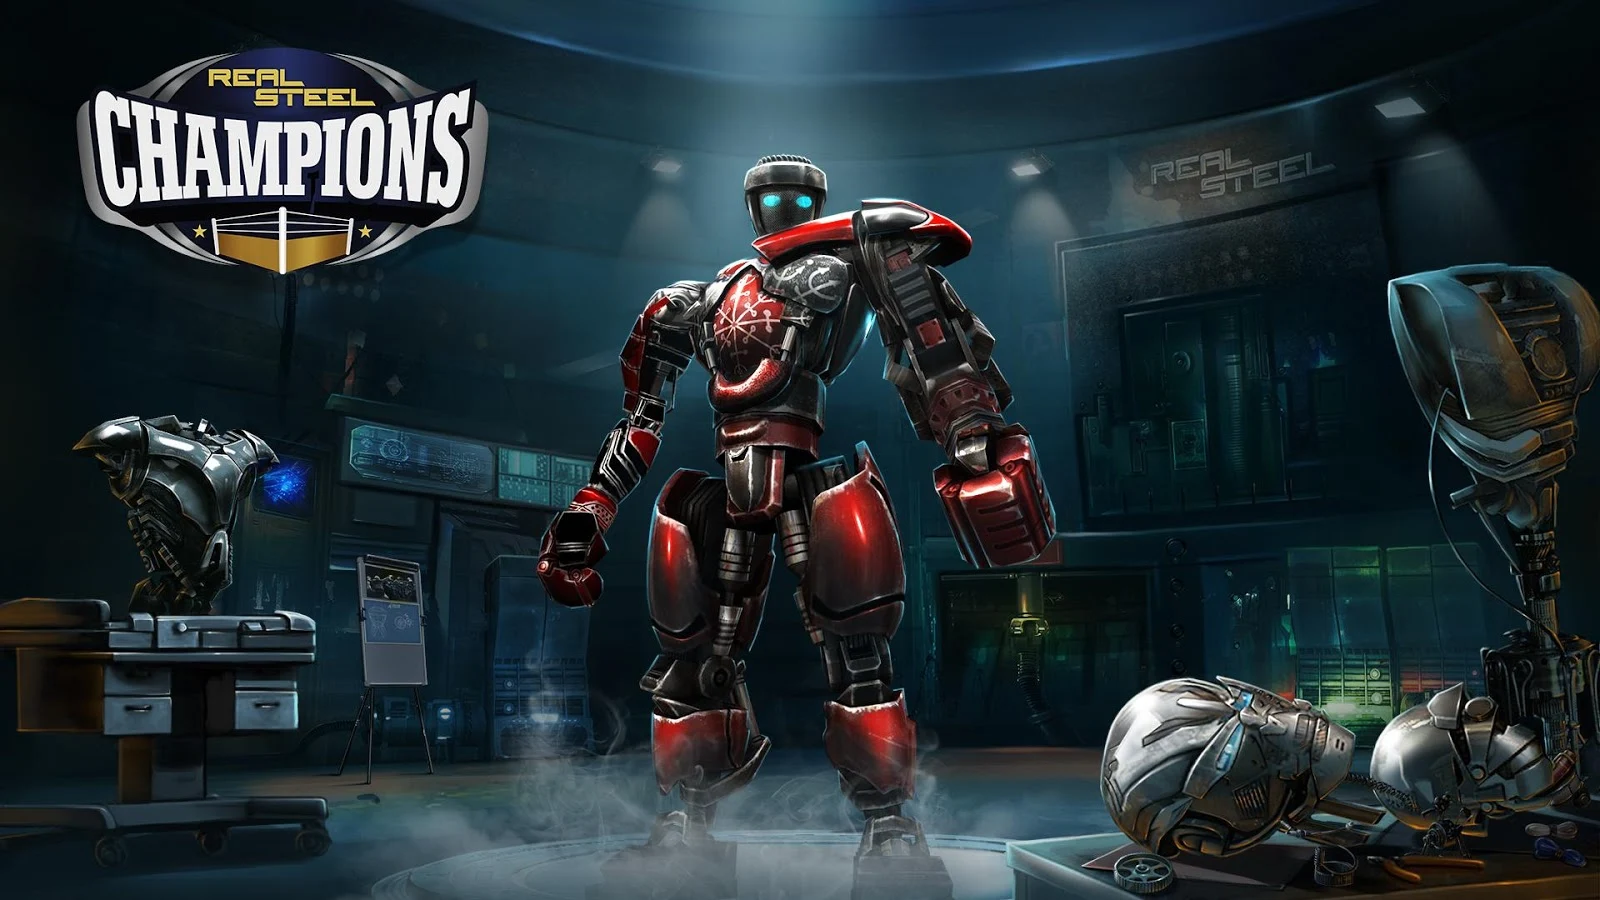  Real Steel Boxing Champions- หน้าจอ 